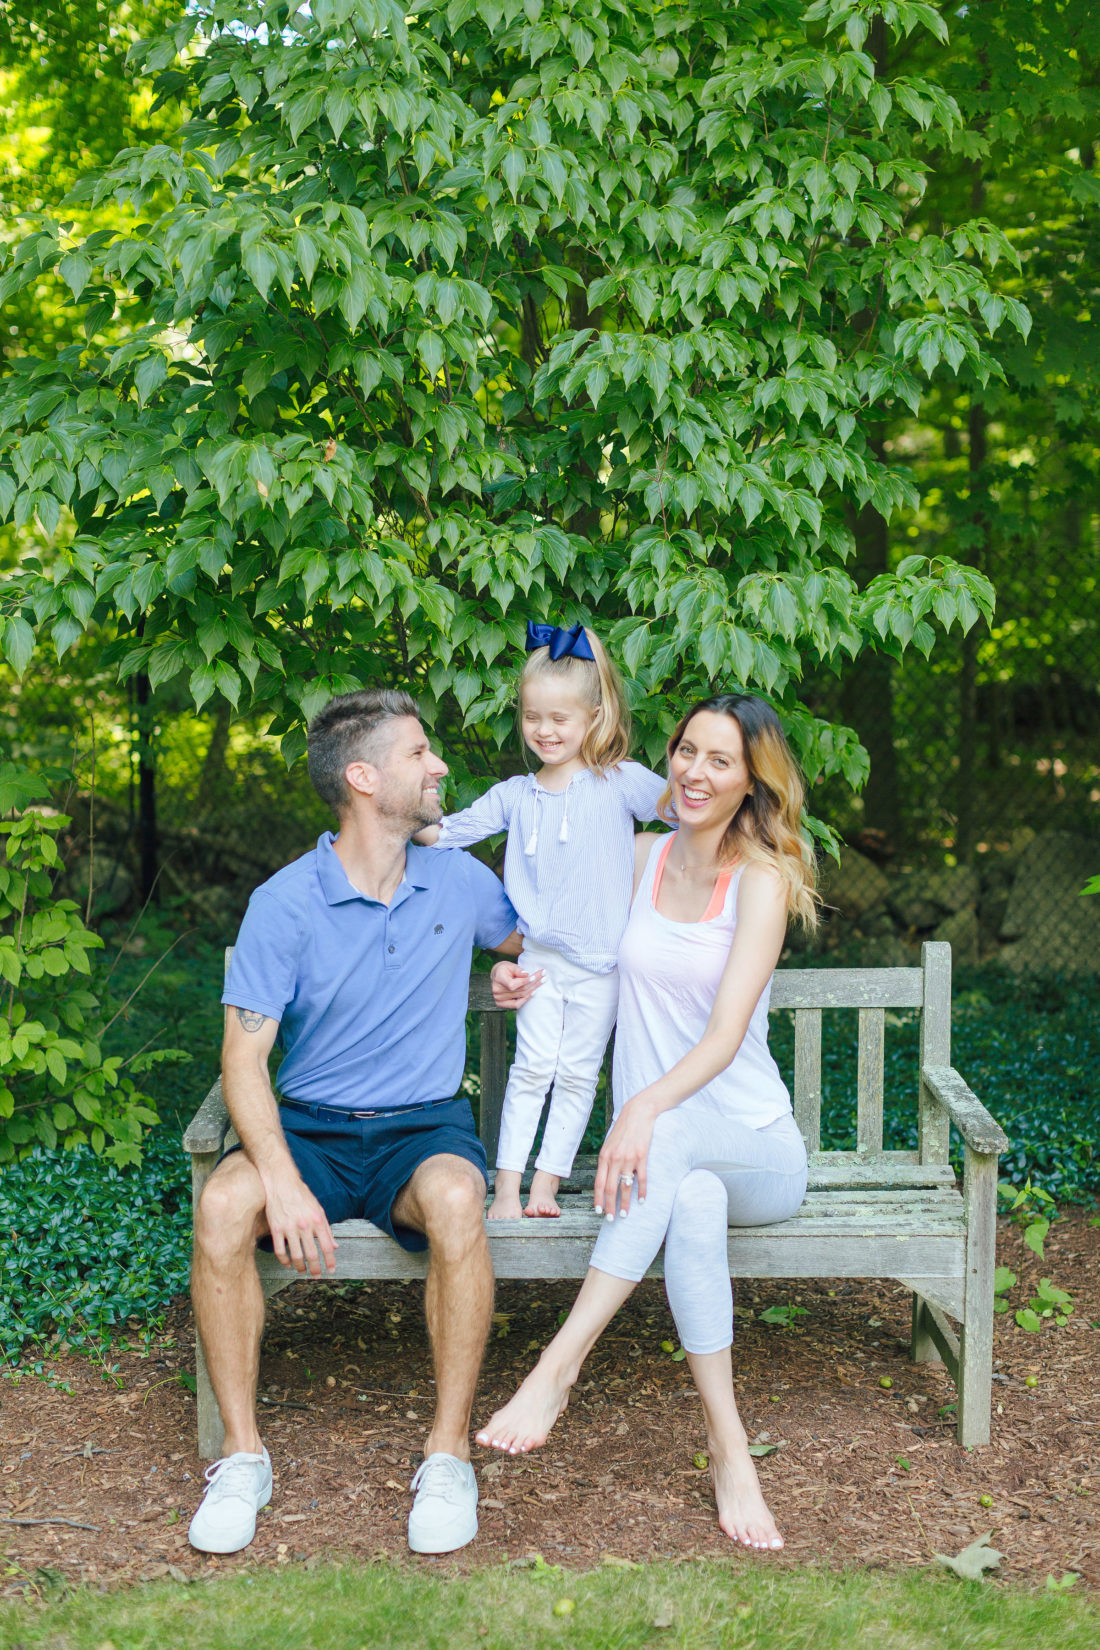 Eva Amurri Martino and Kyle Martino sit with four year old daughter marlowe on a bench surrounded by greenery in the yard of their Connecticut home